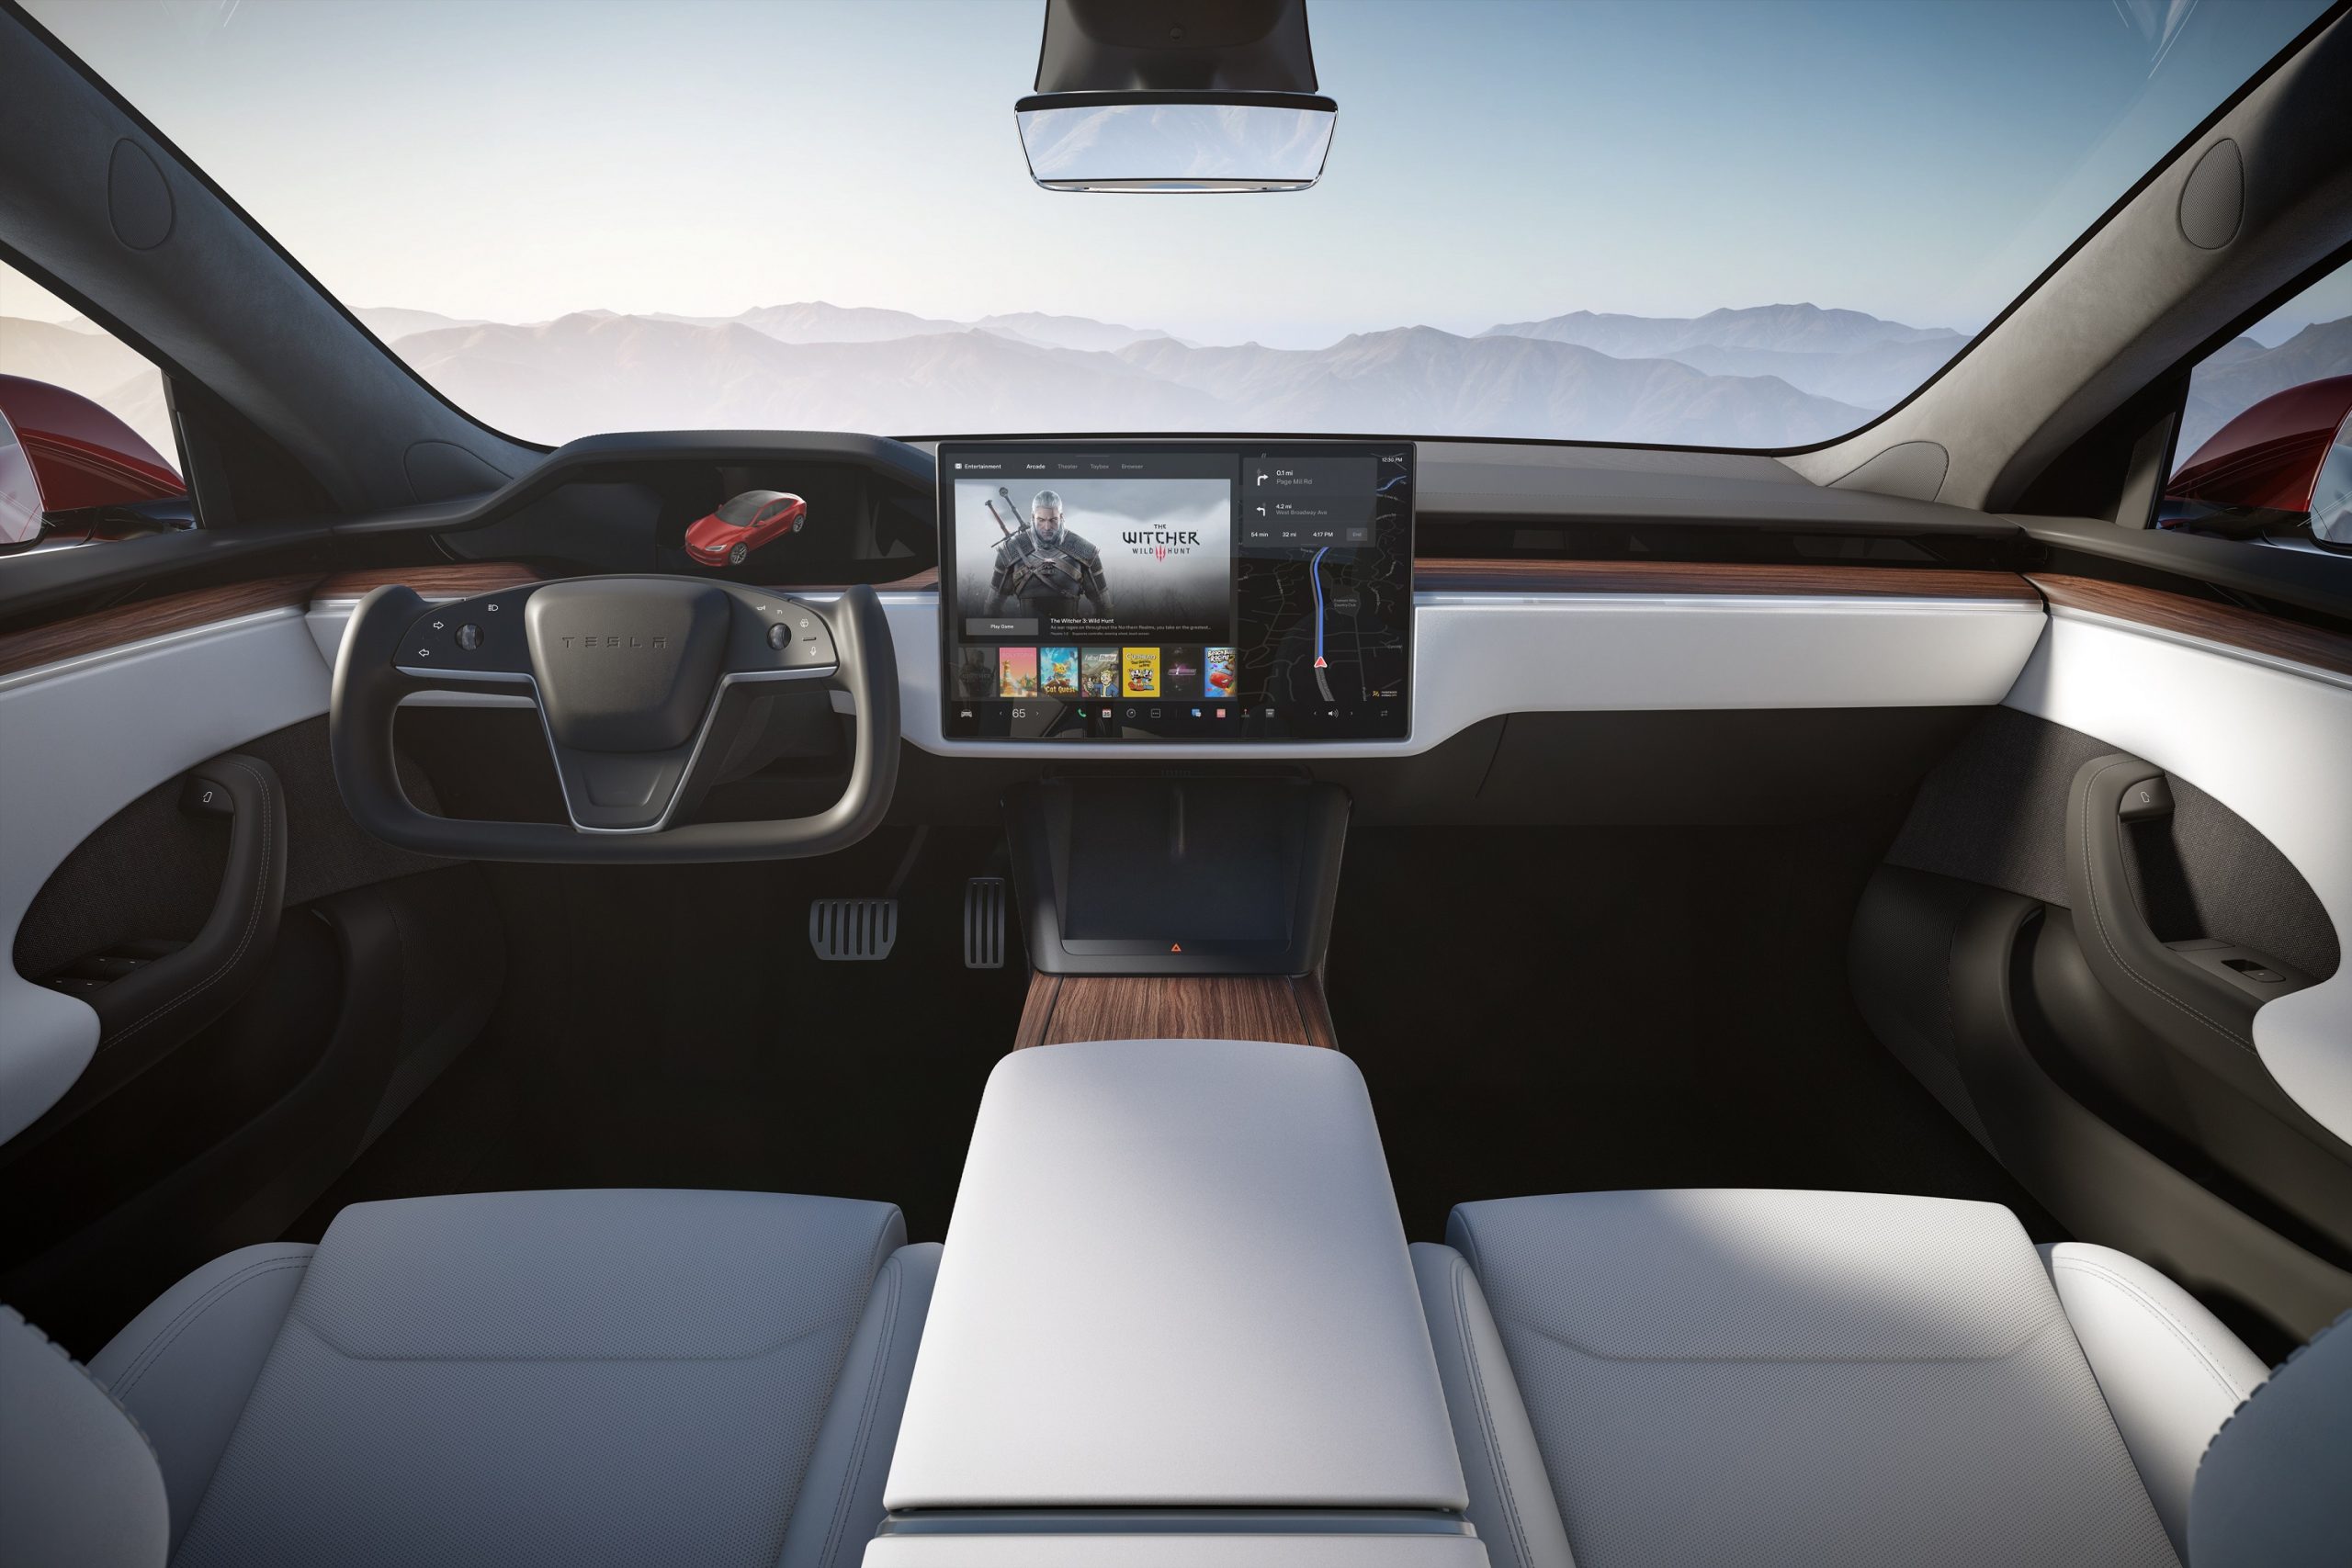 The interior of a Tesla Model S sedan displaying video game content on the center screen